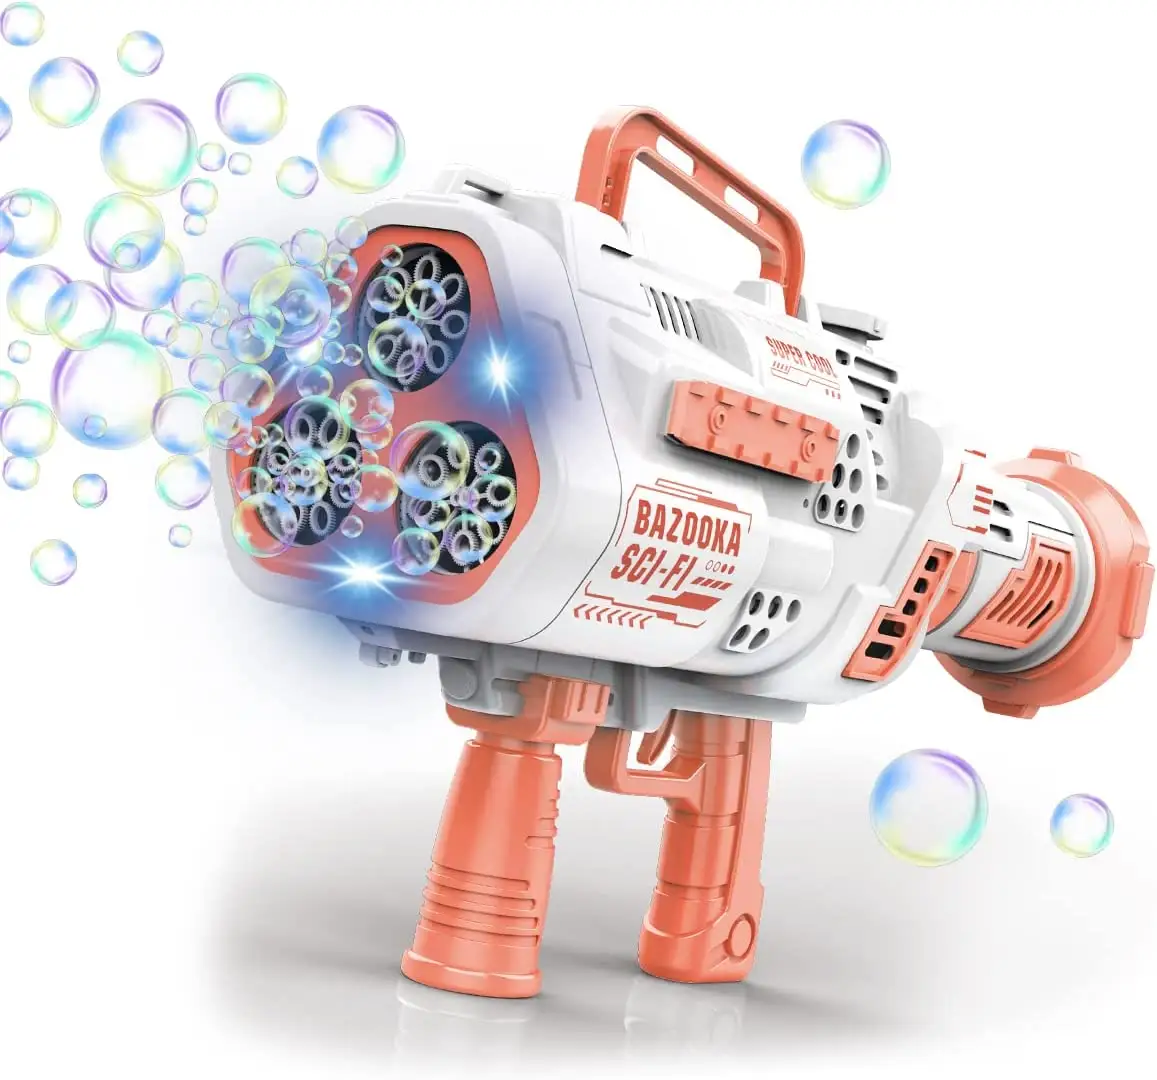 China Factory Outdoor Automatic Bubble Blower 24 Hole Light Up Electric Bubble Bazooka Launcher For Kids